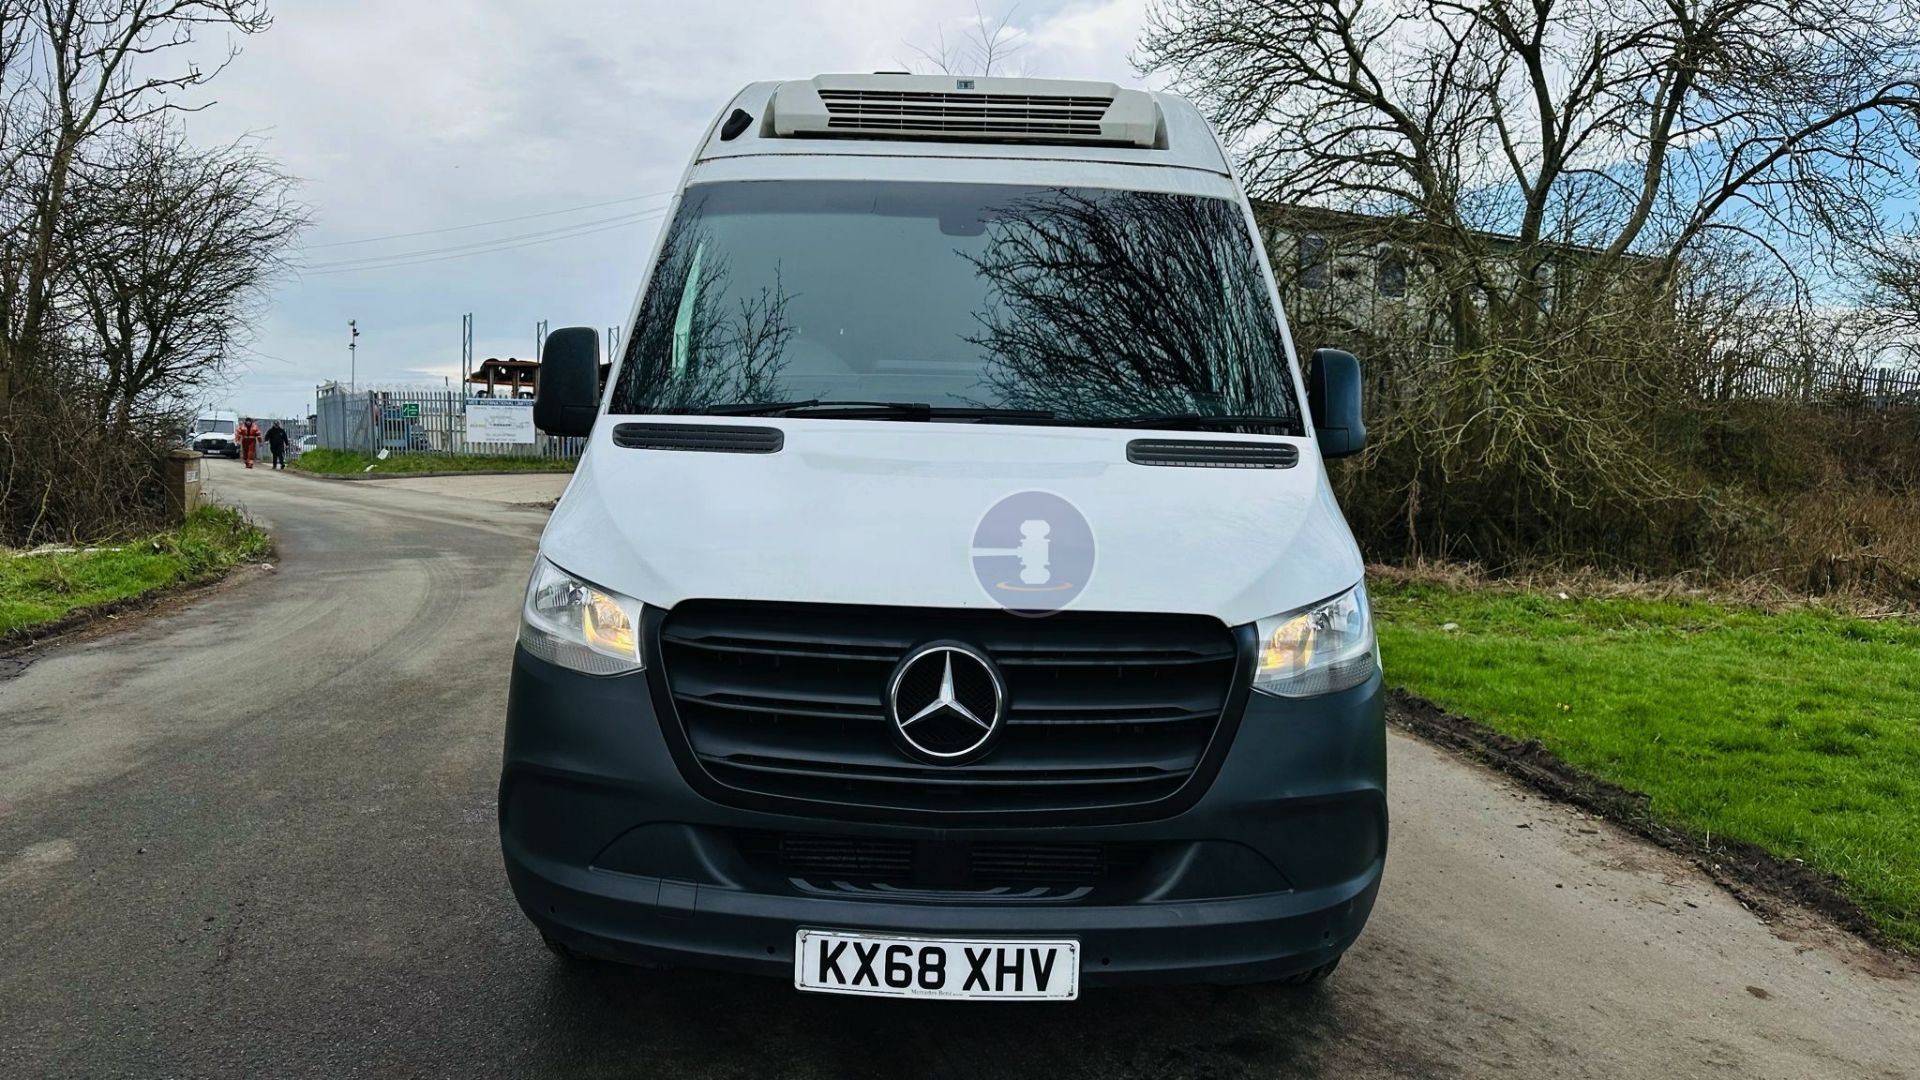 MERCEDES-BENZ SPRINTER 314 CDI *MWB - REFRIGERATED VAN* (2019 - FACELIFT MODEL) *OVERNIGHT STANDBY* - Image 5 of 41